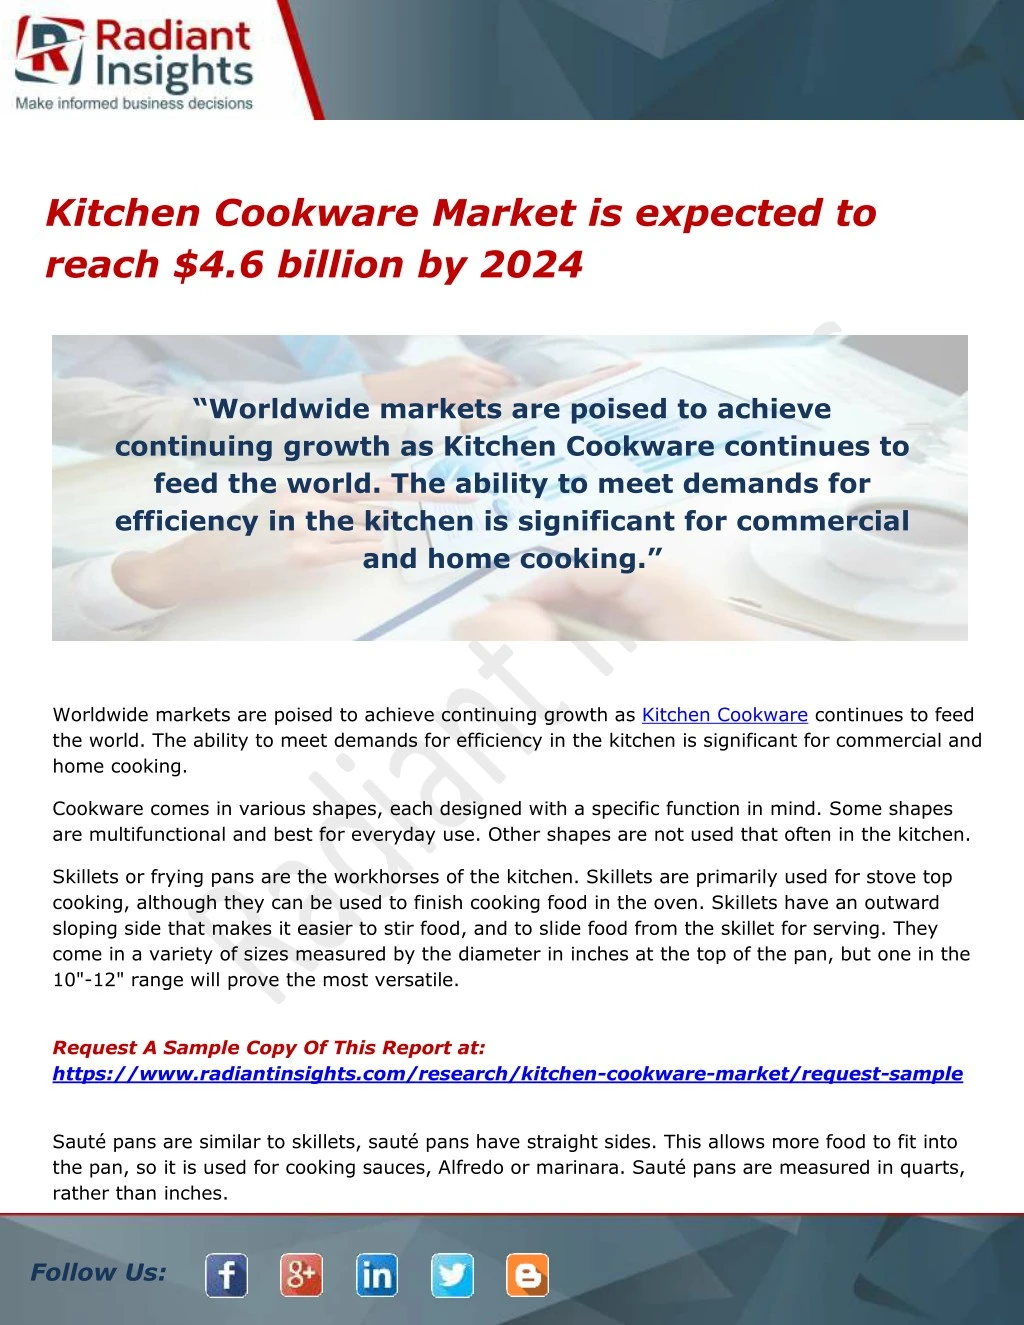 kitchen cookware market is expected to reach